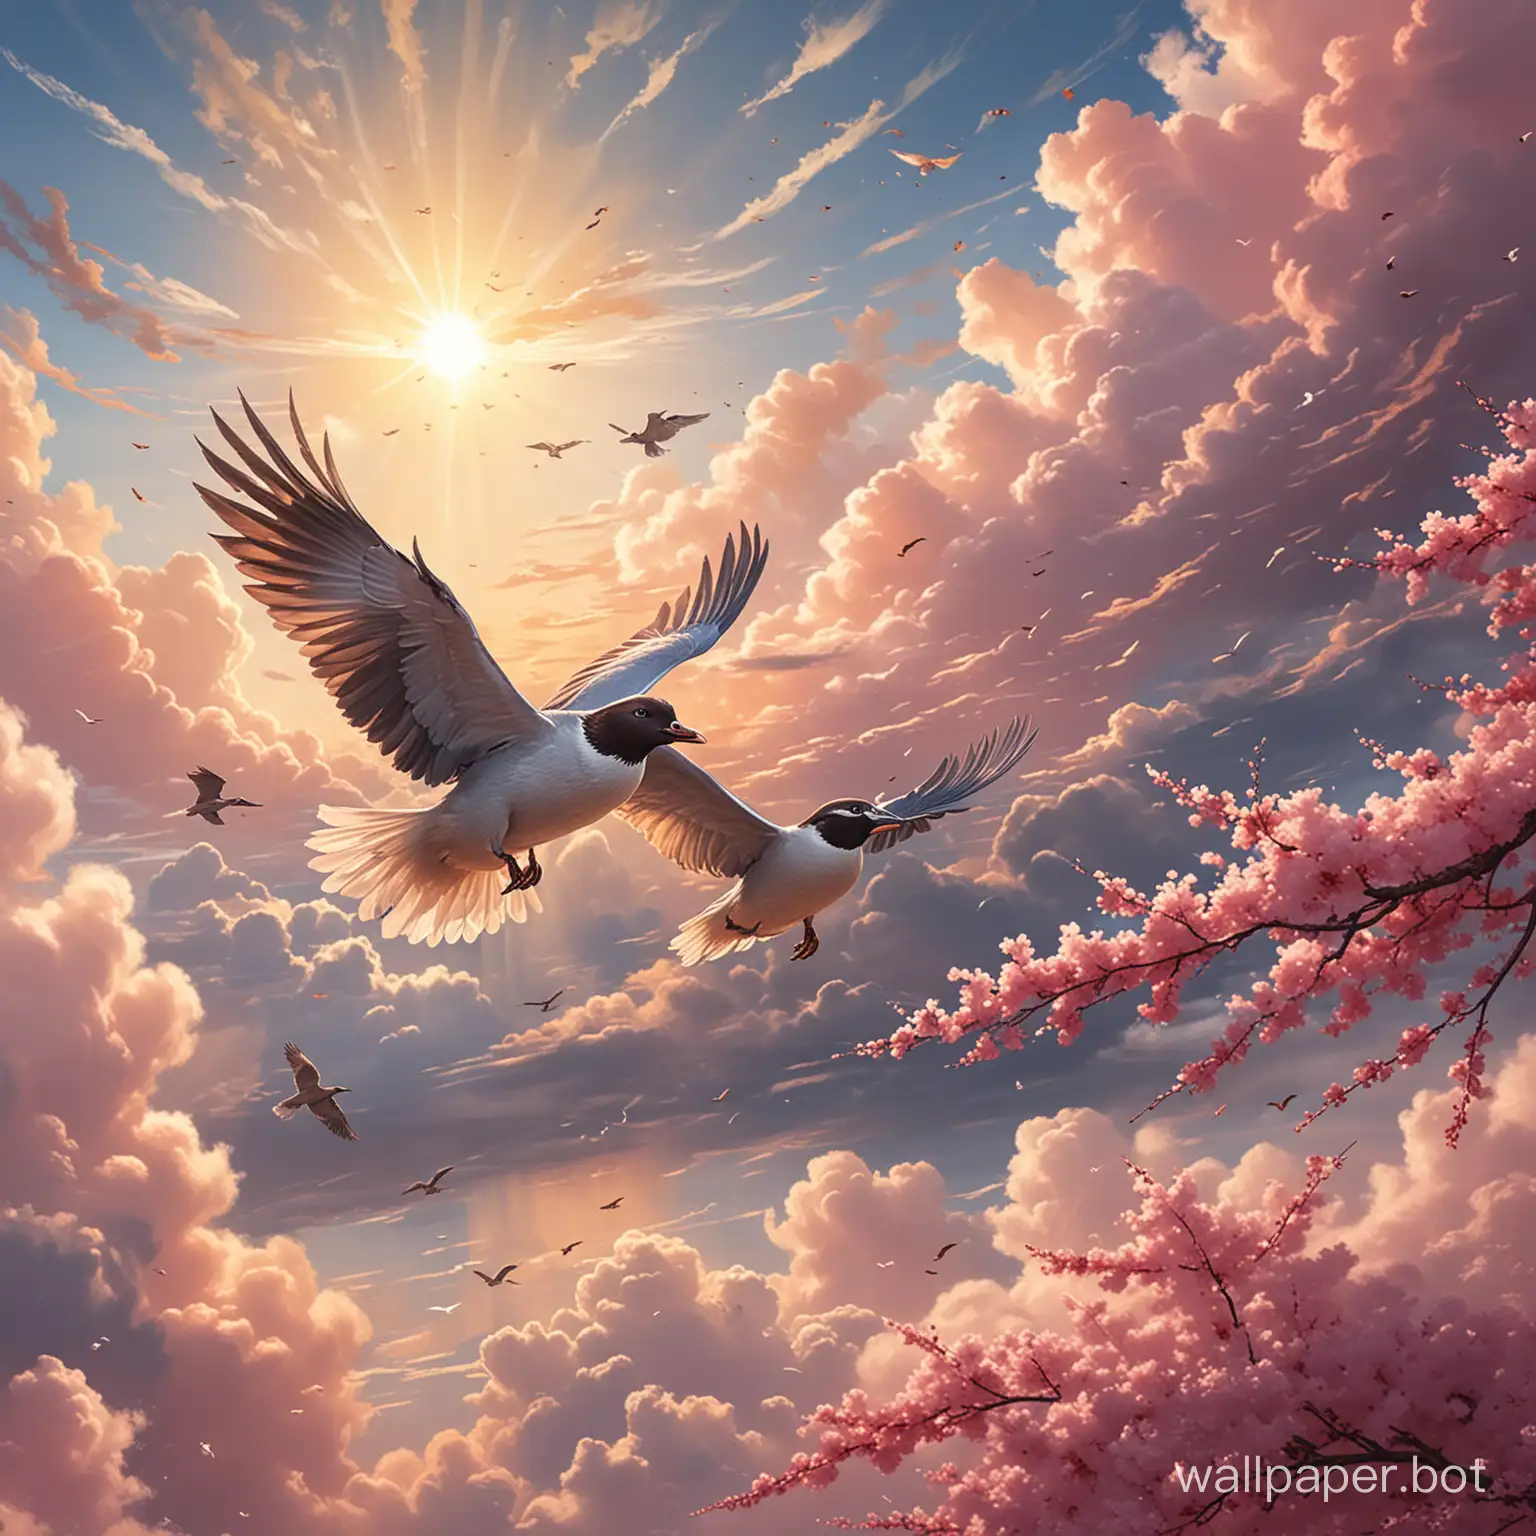 This image depicts two birds soaring through the clouds. The bird above appears to be a larger species, gliding gracefully, while the bird below resembles a duck with its feather details clearly visible. The background is illuminated by bright sunlight piercing through the clouds, casting a dreamy and serene ambiance. Additionally, there is a blooming cherry blossom in the top right corner, adding a touch of vibrant color to the scene. Overall, this is a poetic and romantic visual composition.